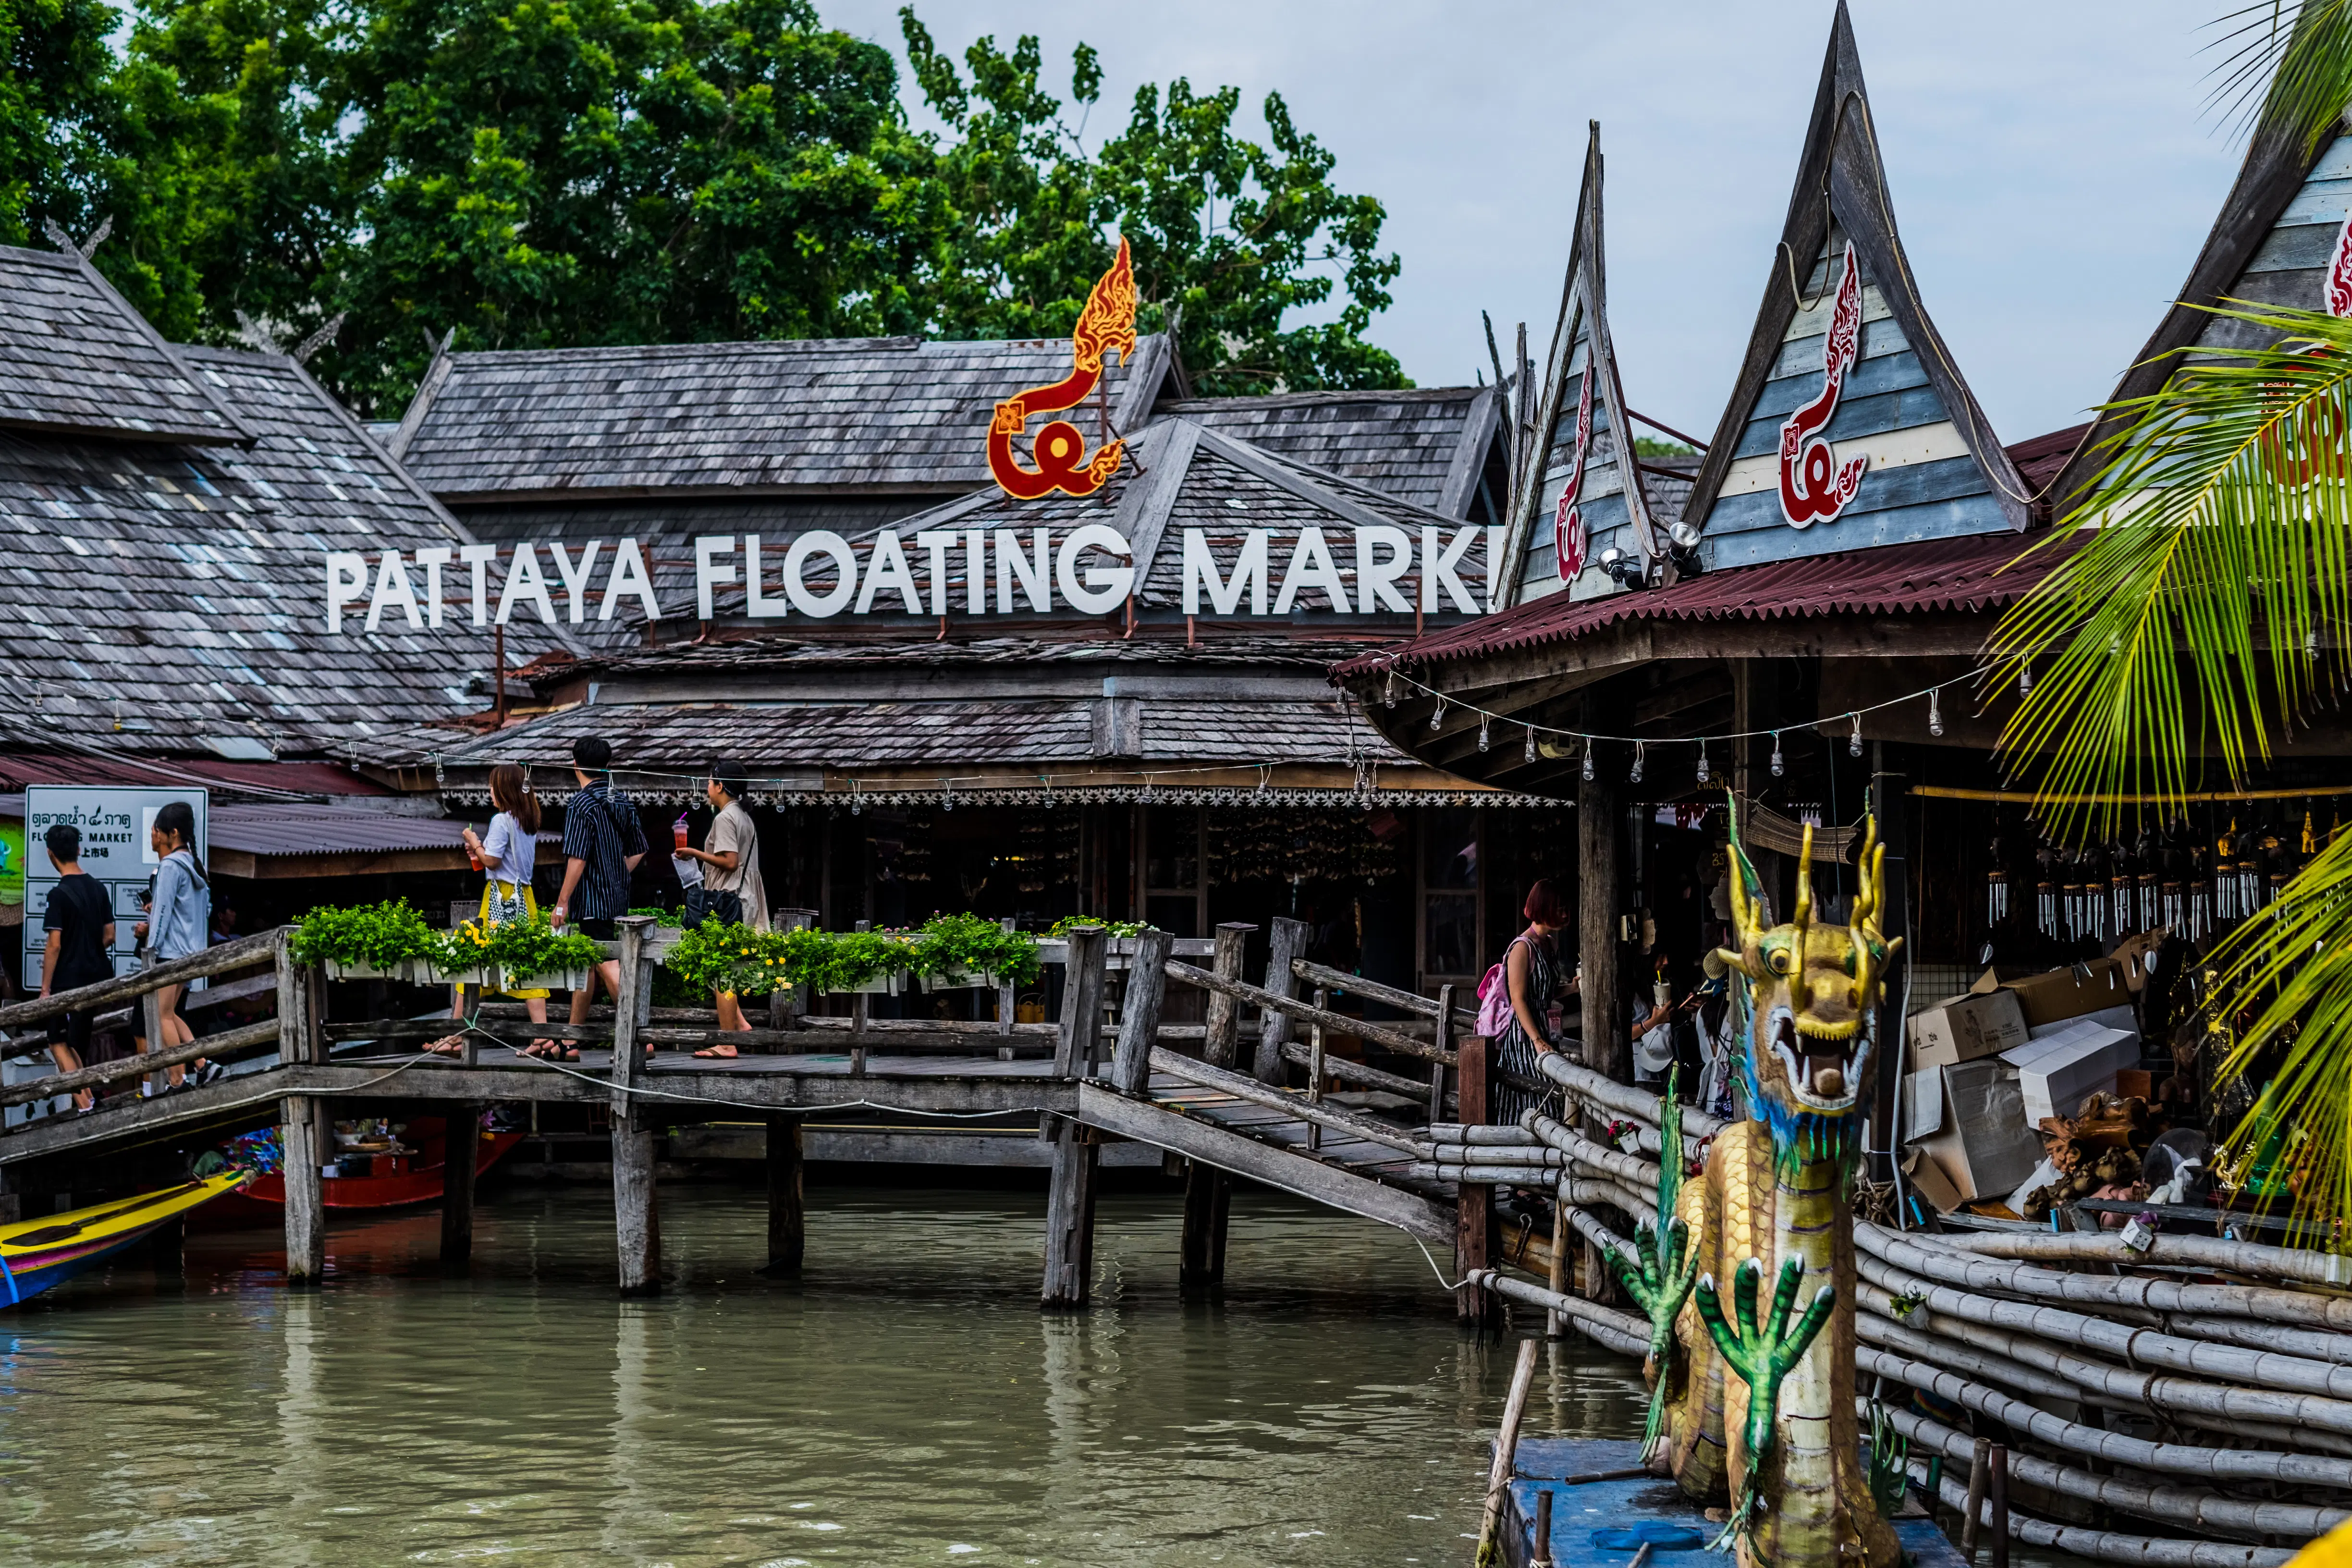 Pattaya Floating Market in Thailand, central_asia | Spices,Organic Food,Fruit & Vegetable,Herbs,Natural Beauty Products - Country Helper